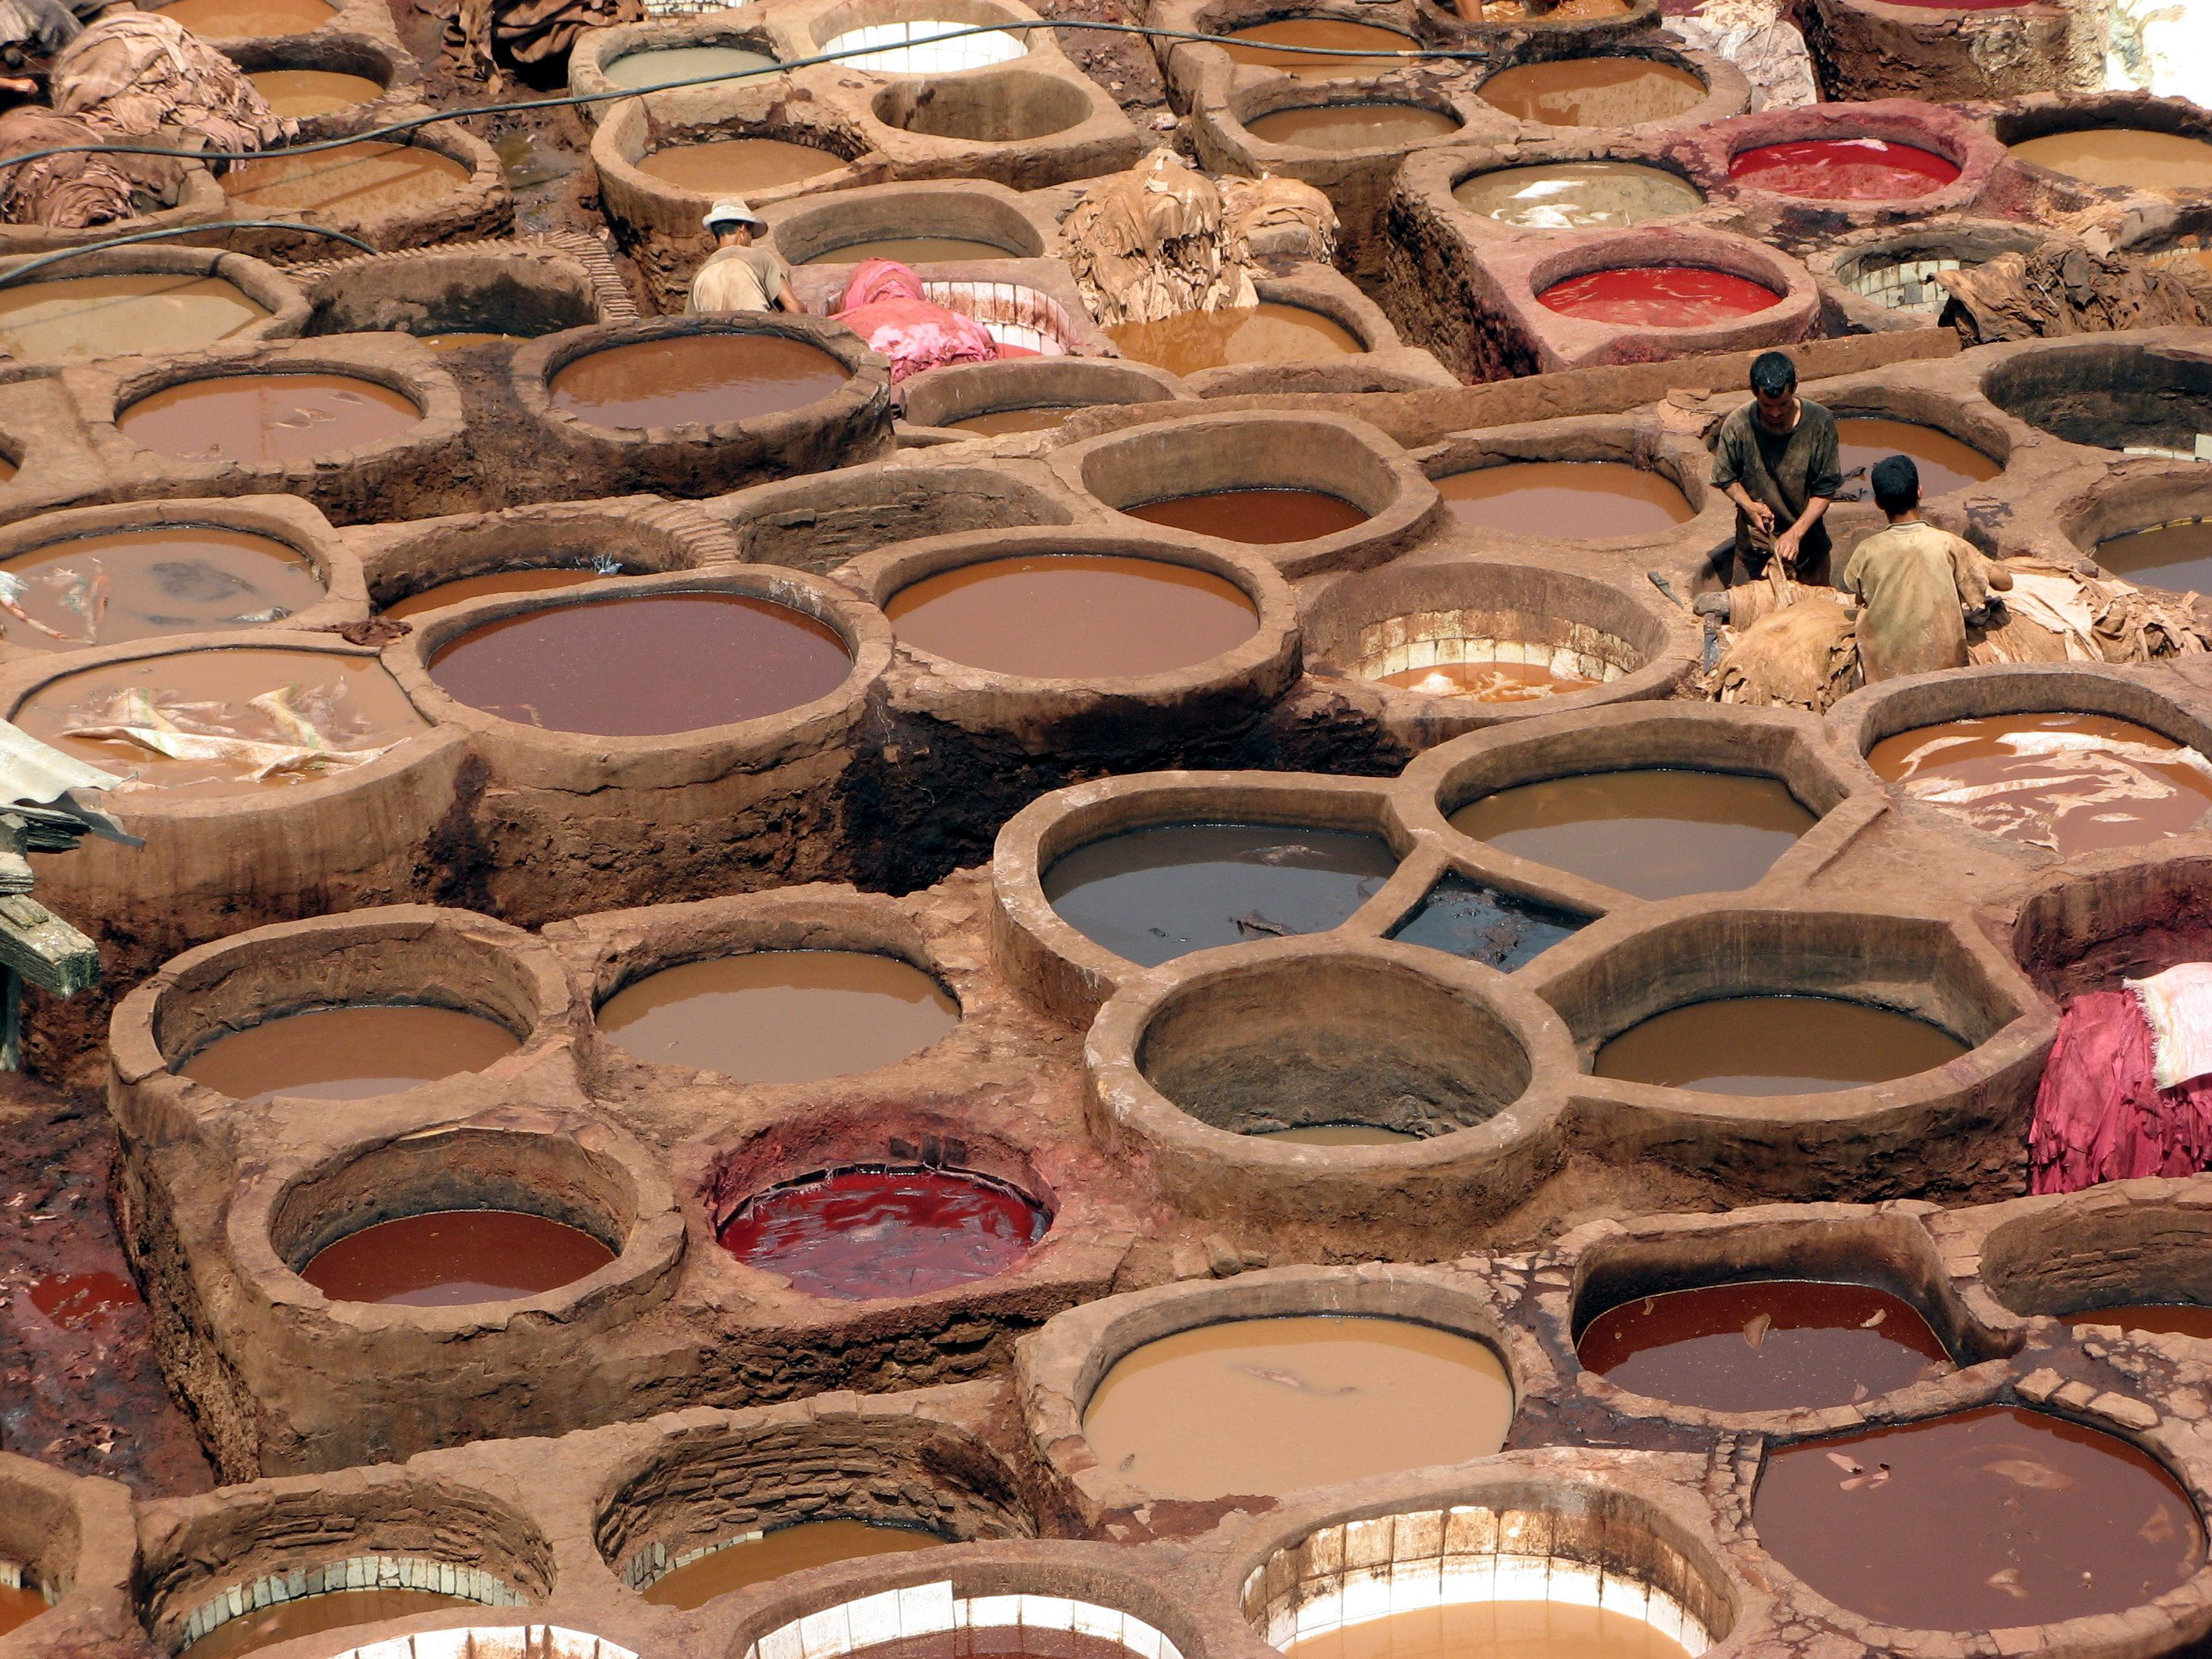 Leather dyeing vats in Fes